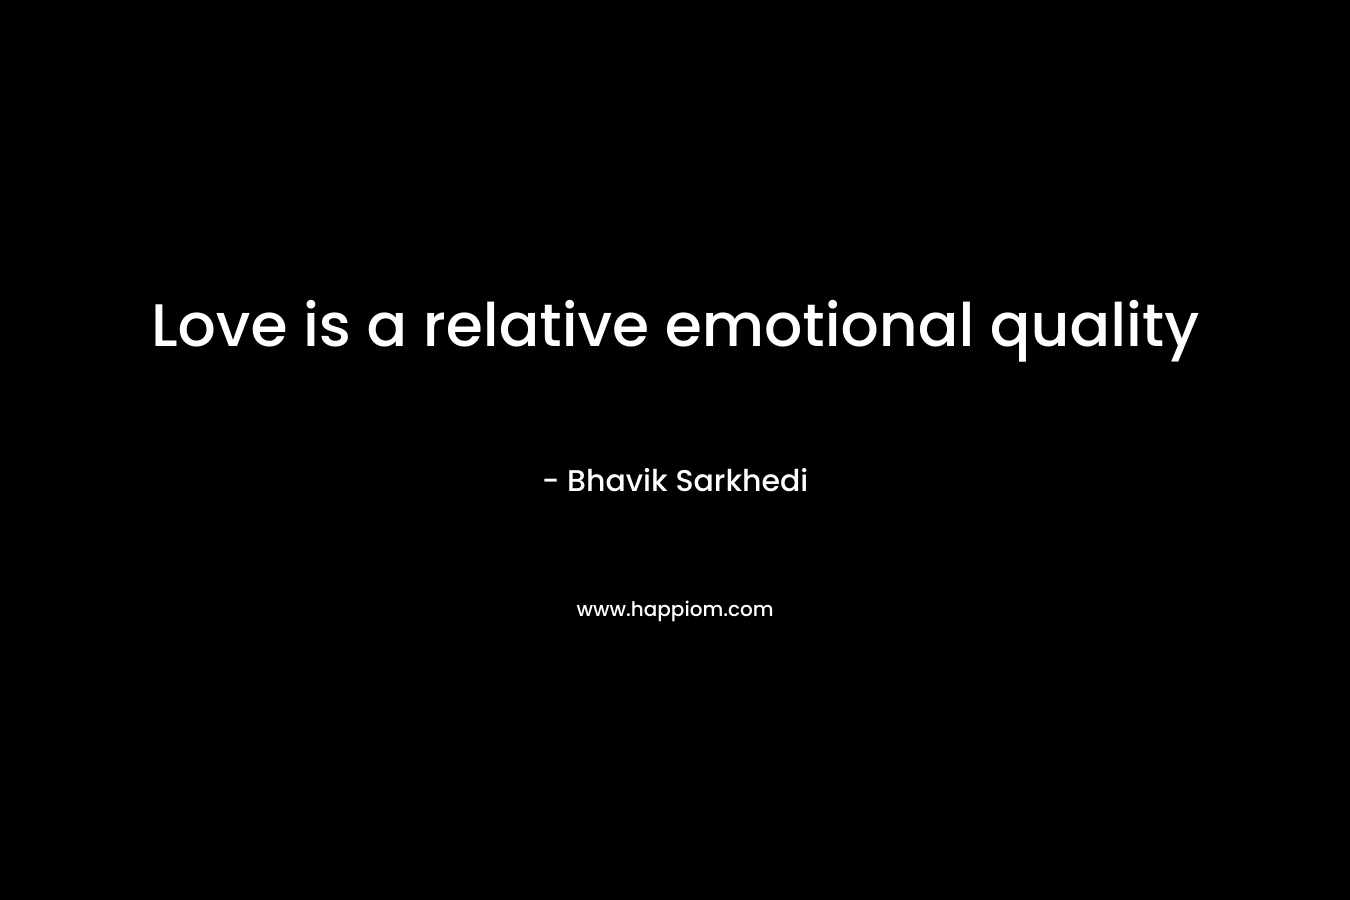 Love is a relative emotional quality